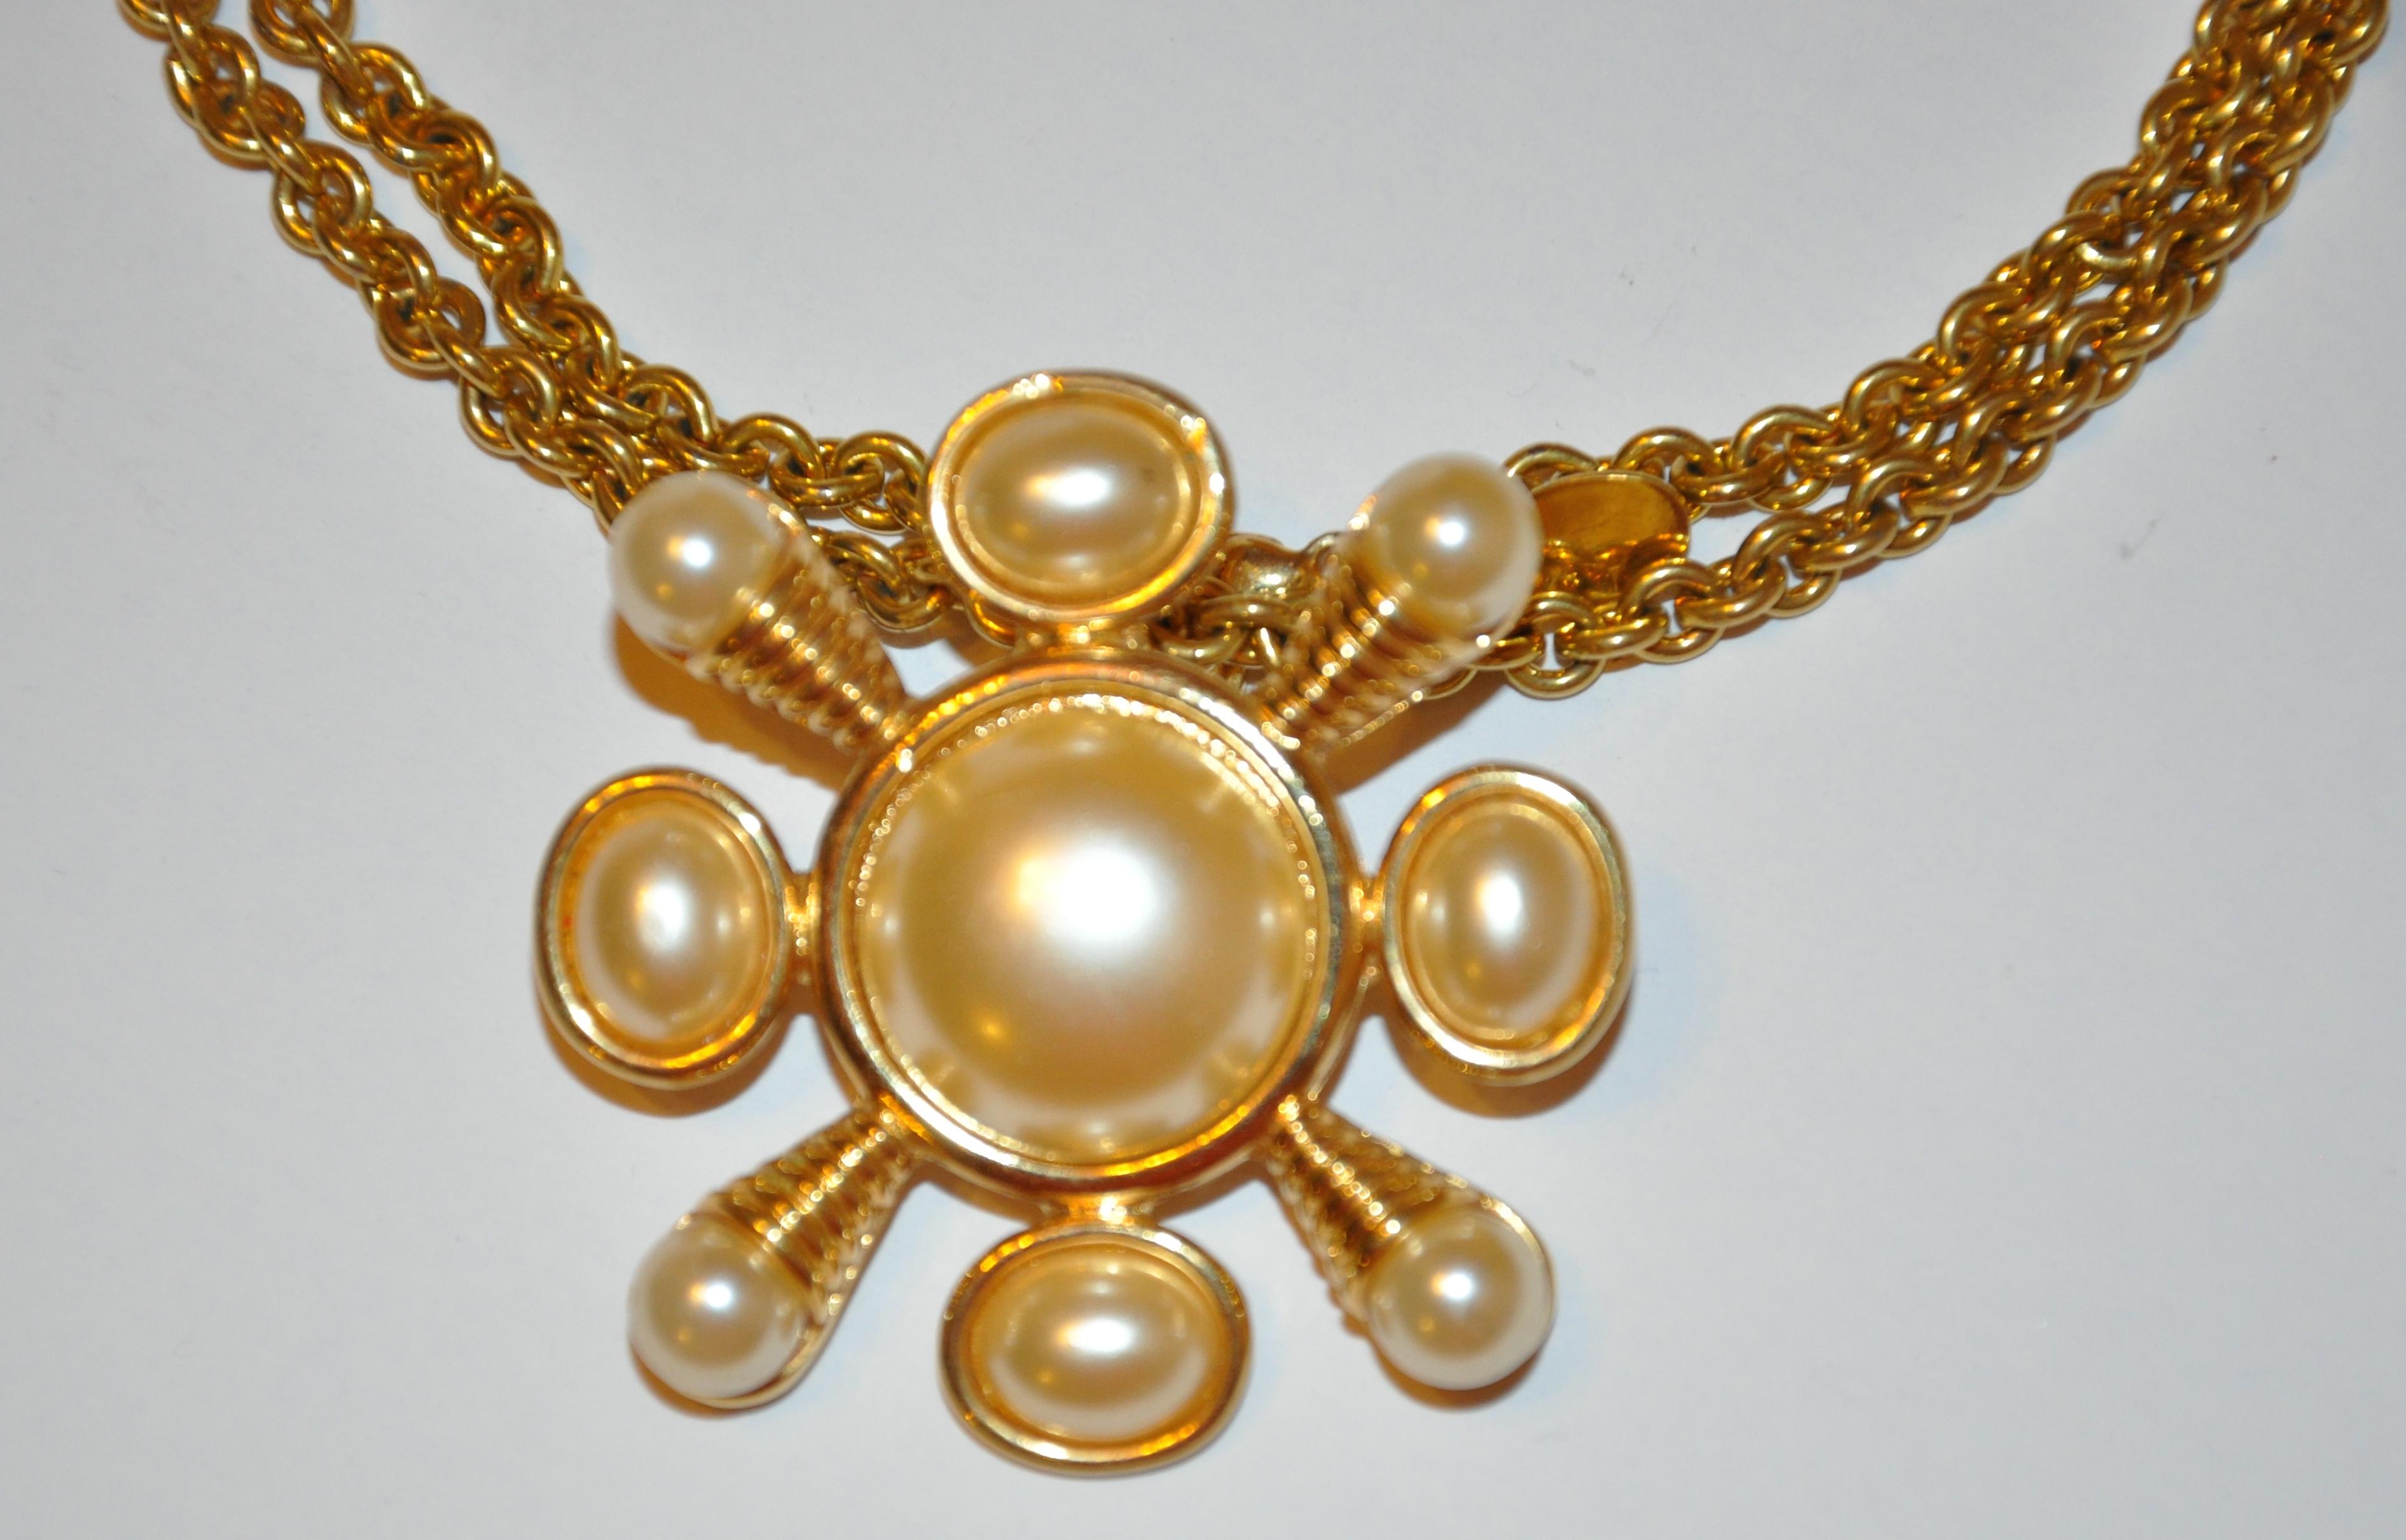        Kenneth Jay Lane etched gilded gold vermeil hardware accented with multi-size pearl-like embellishments, has the optional choice of being worn as a pendant or, as a brooch for your desire. The brooch itself measures 1 6/8 inches by 1 6/8